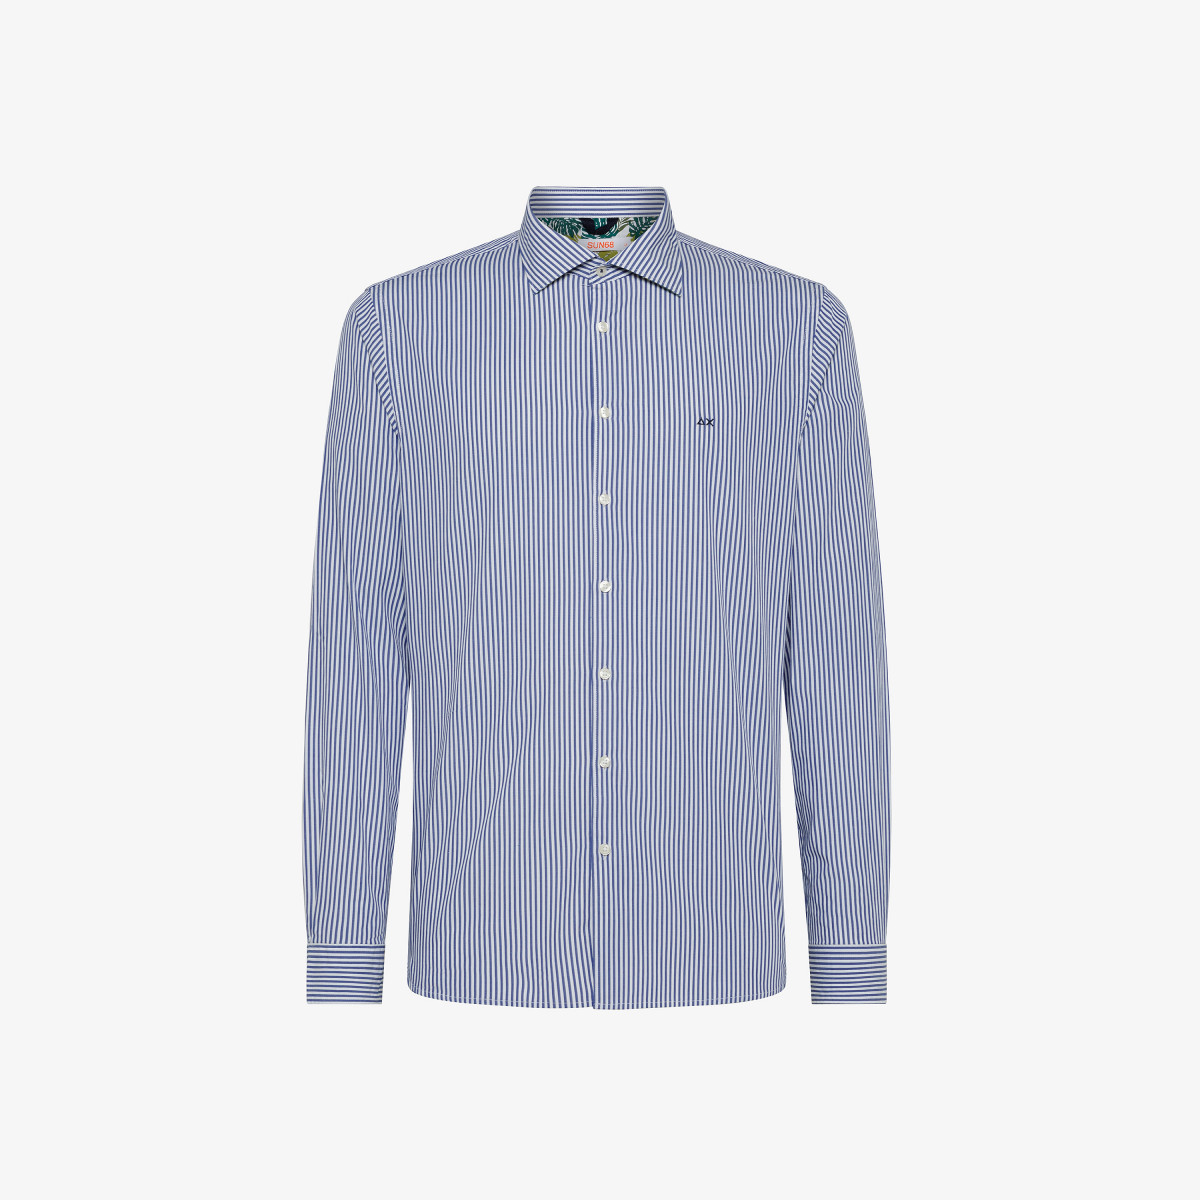 SHIRT FANCY WITH DETAIL NAVY BLUE